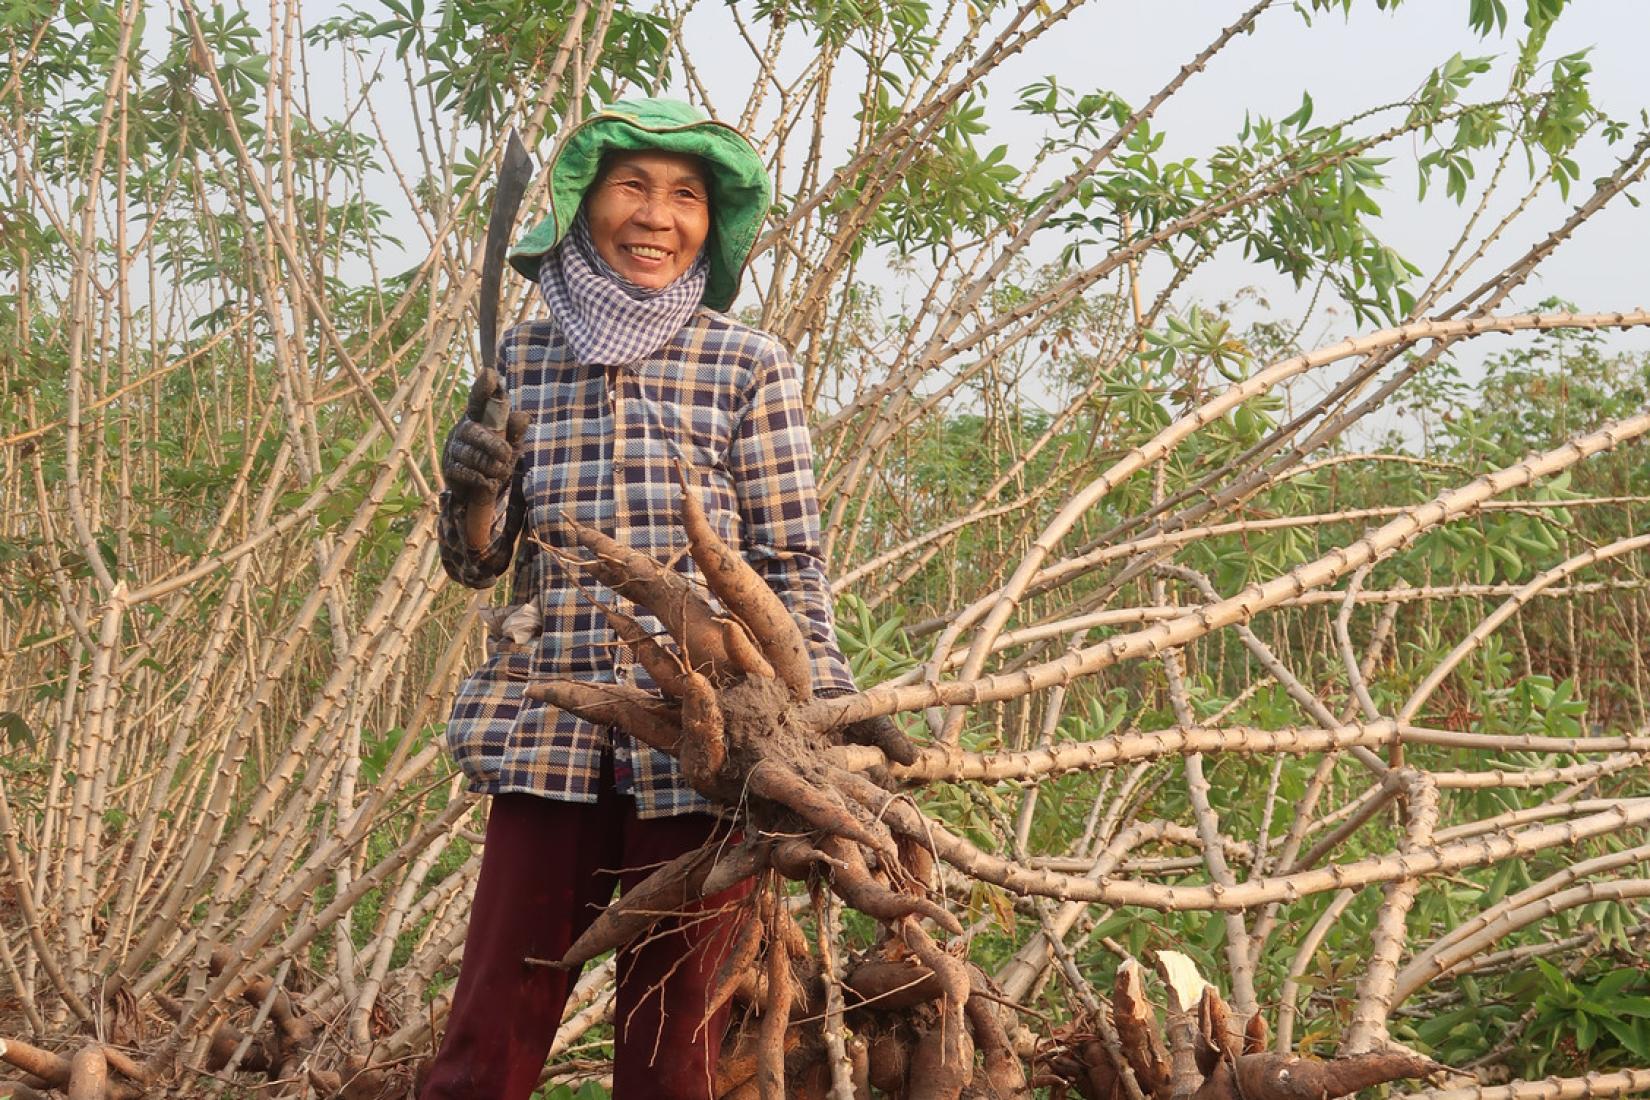 Farmer Tra Thi Tron is harvesting a cassava variety introduced by IITA in the second trial in Tay Ninh province, Vietnam.